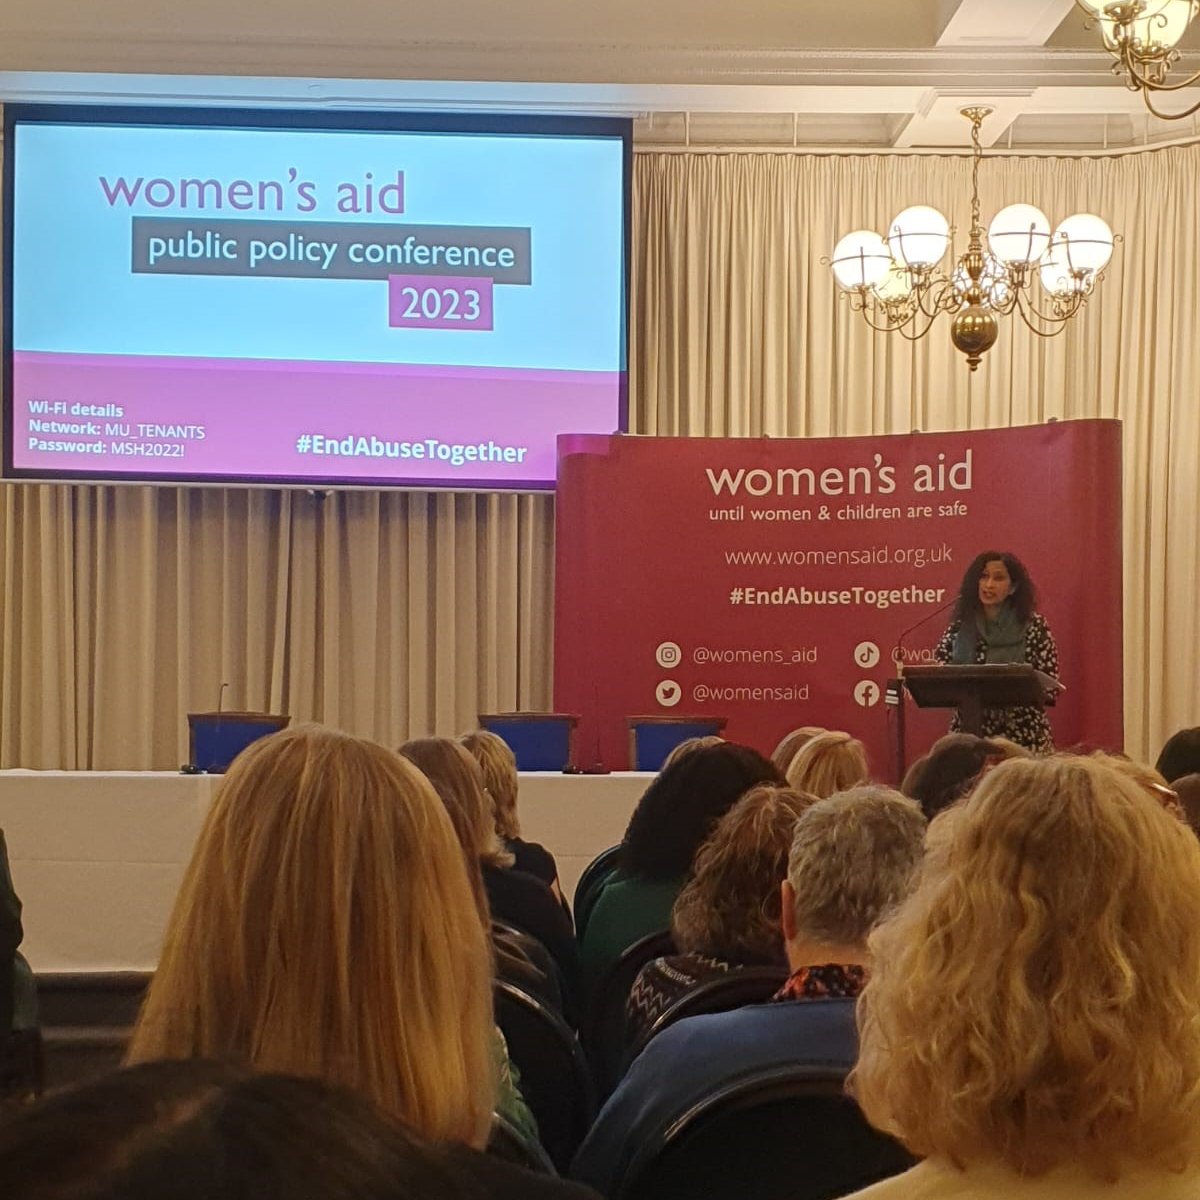 BWP's Colette, is in London today @womensaid Public Policy Conference, hearing from some esteemed speakers. It's great to be part of the conversation about how we can #EndAbuseTogether #DomesticAbuse